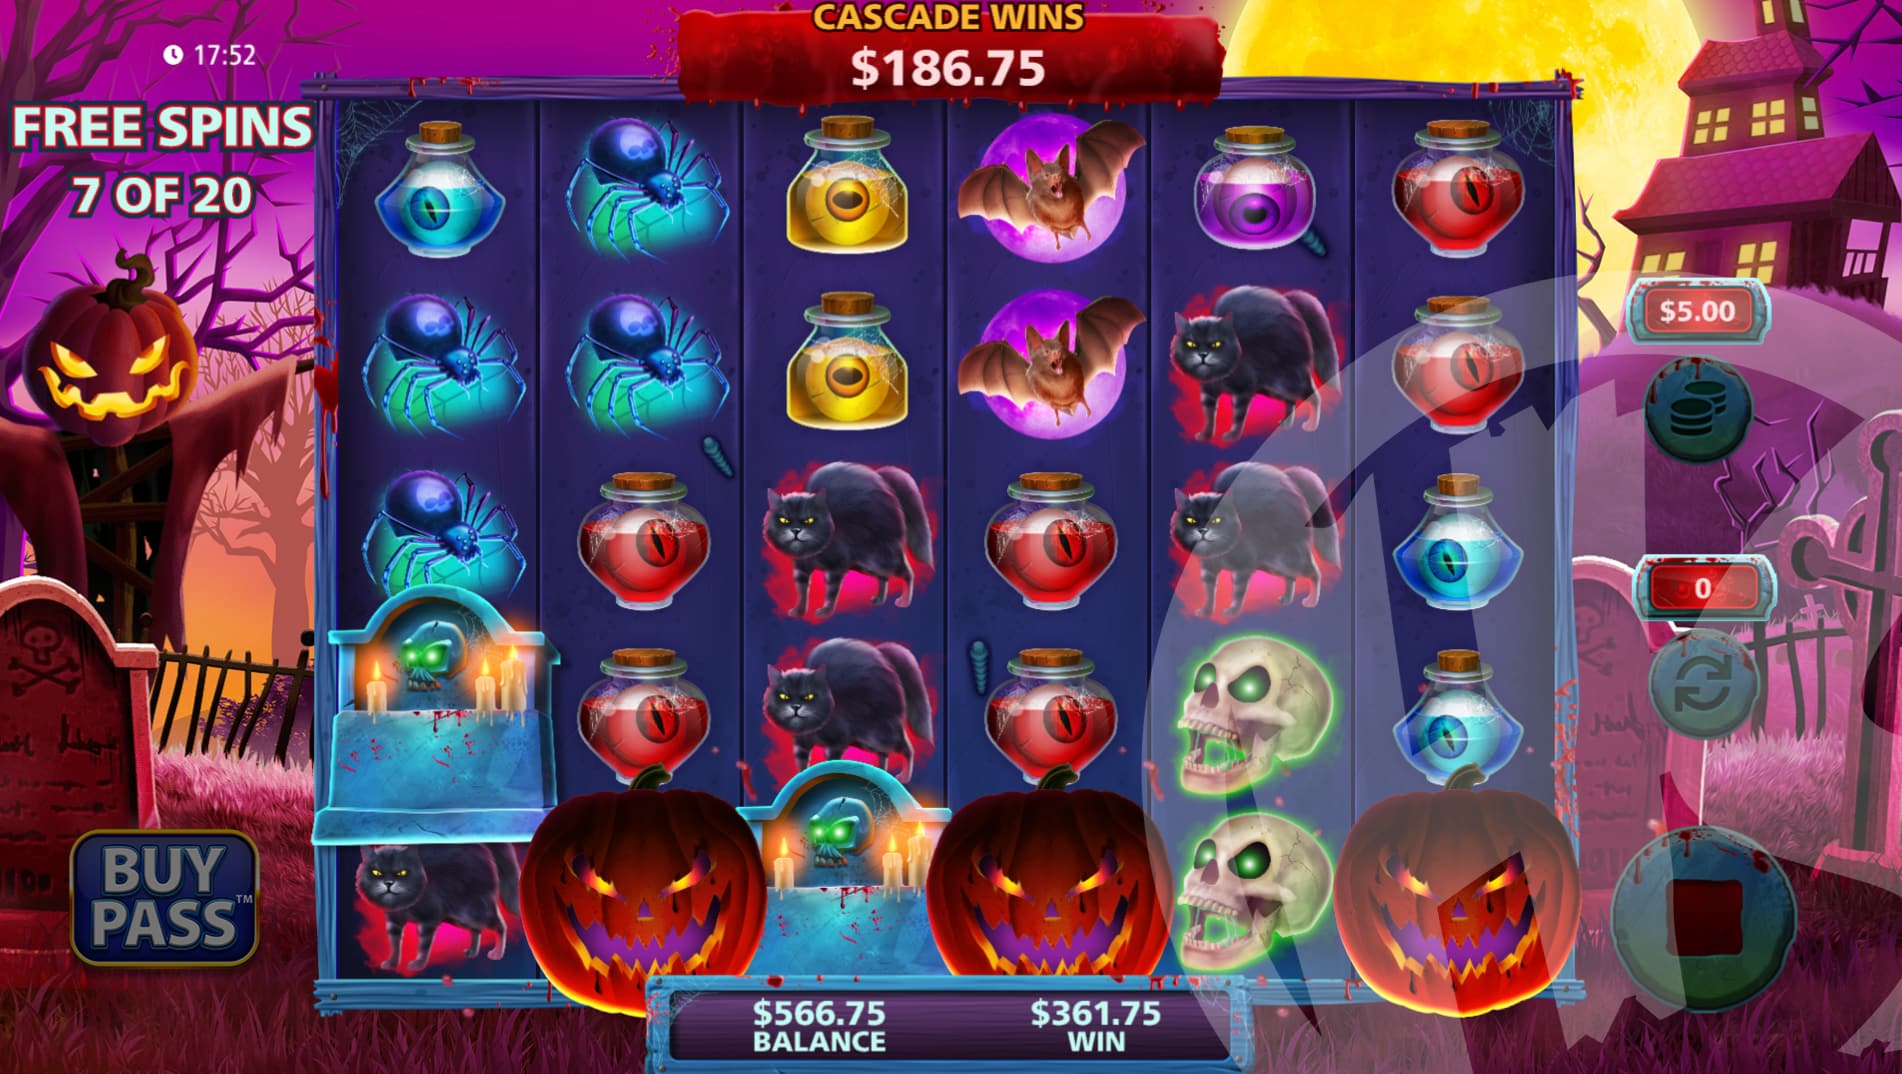 Land 2 or More Pumpkins to Re-Trigger Free Spins